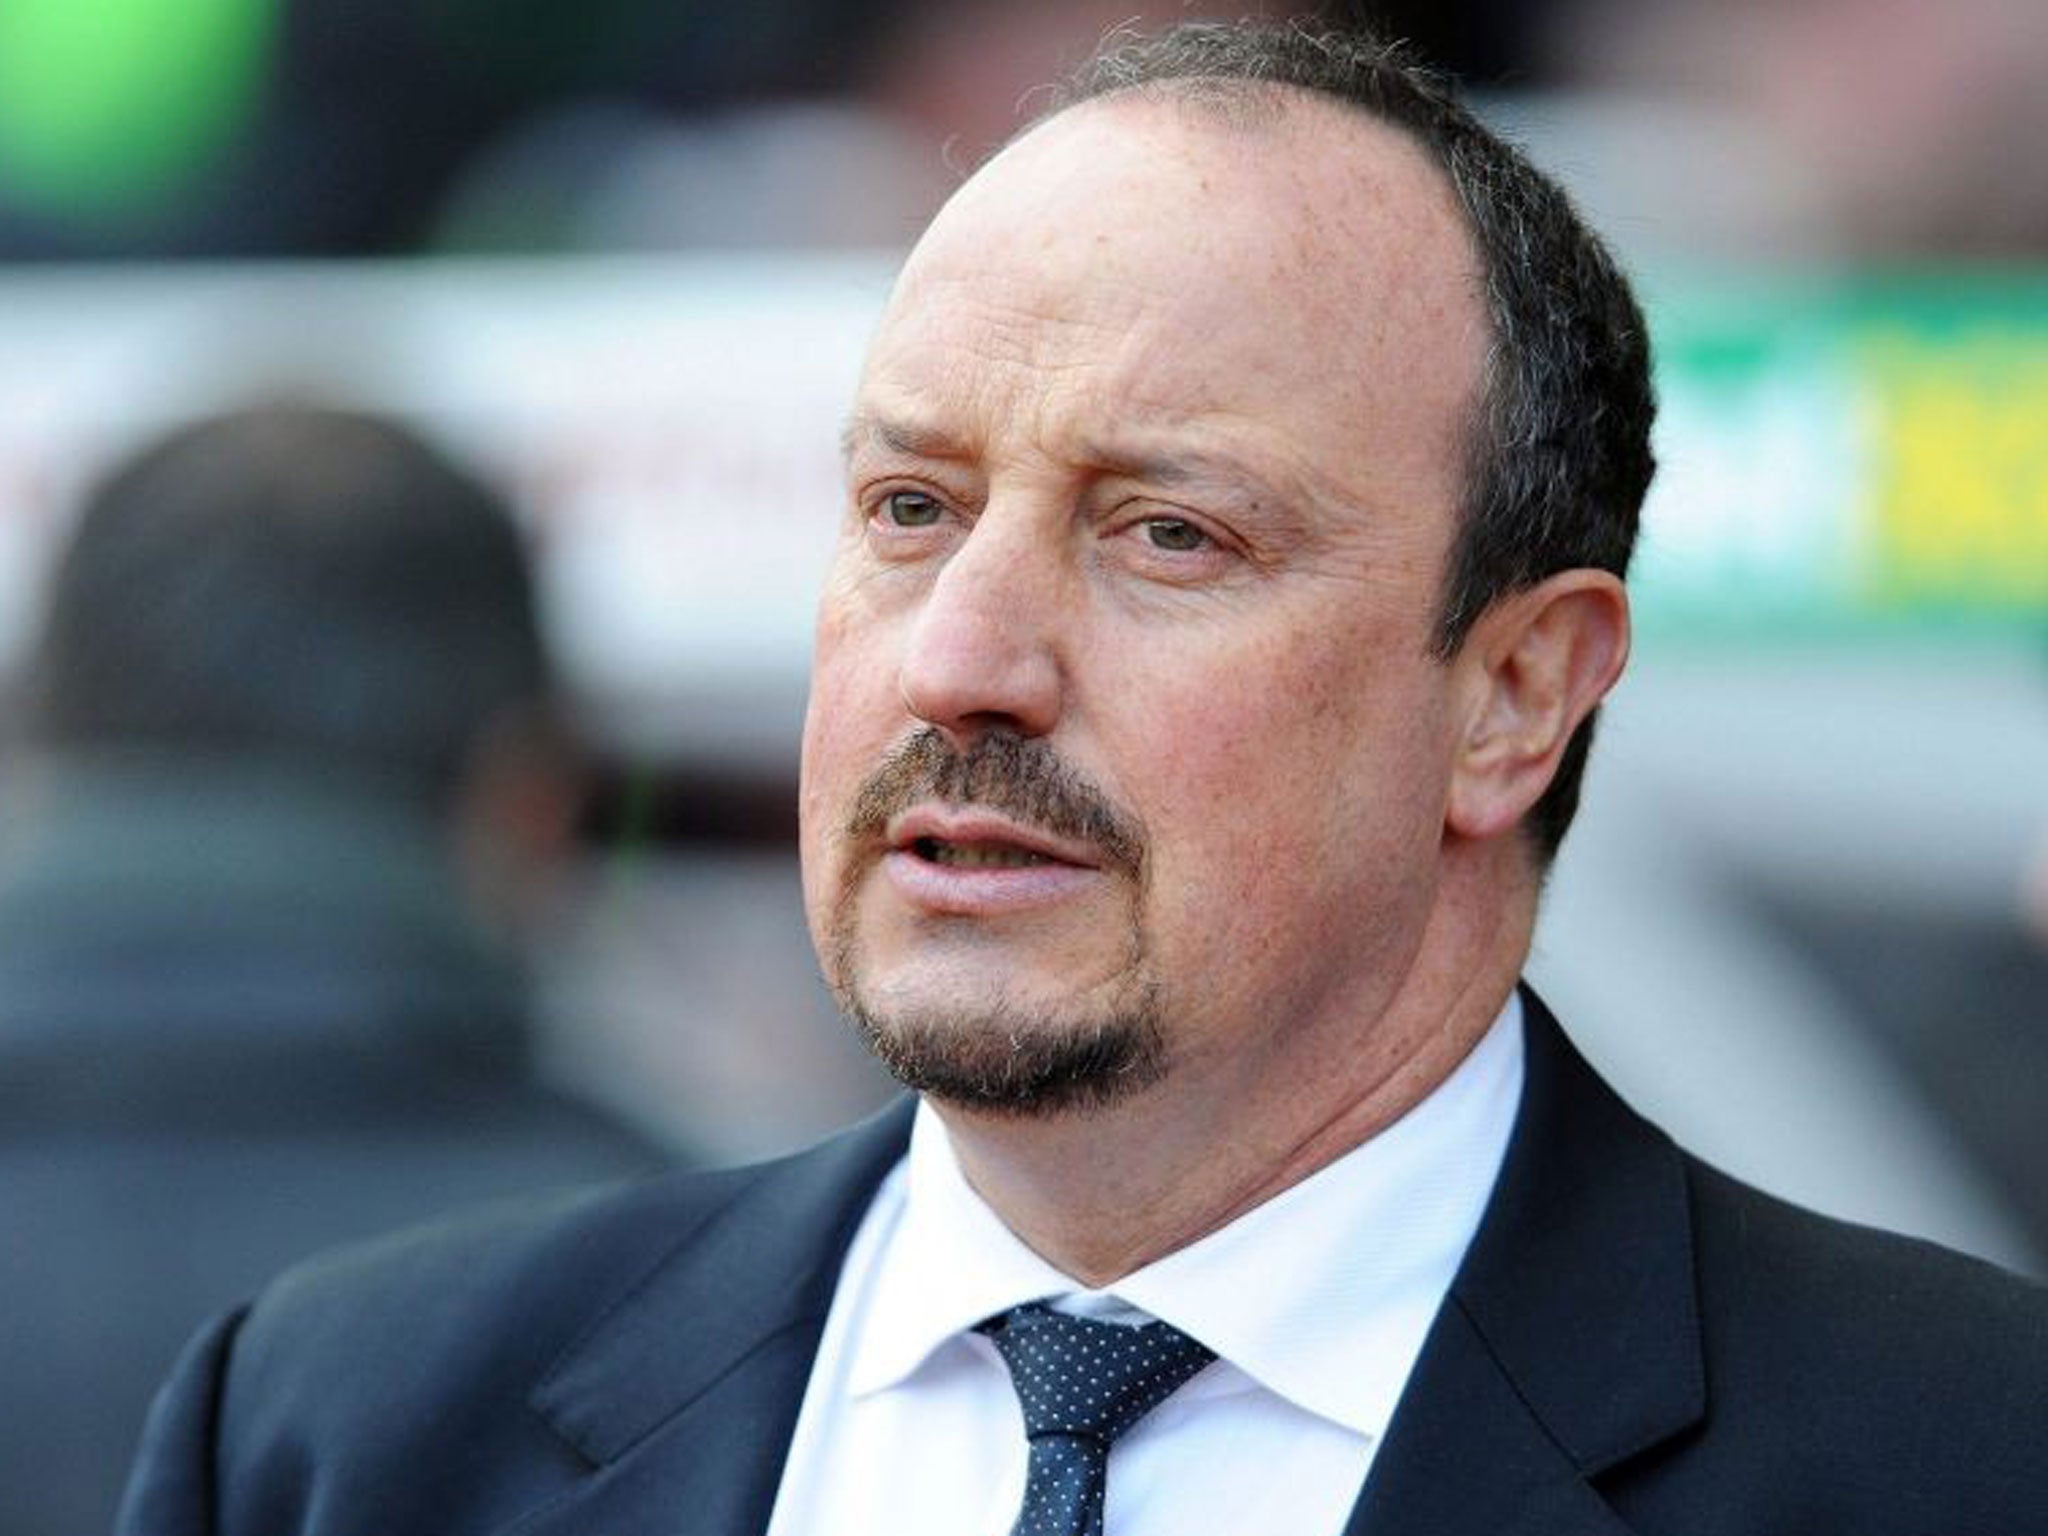 Rafa Benitez’s Chelsea are now up to third place in the league